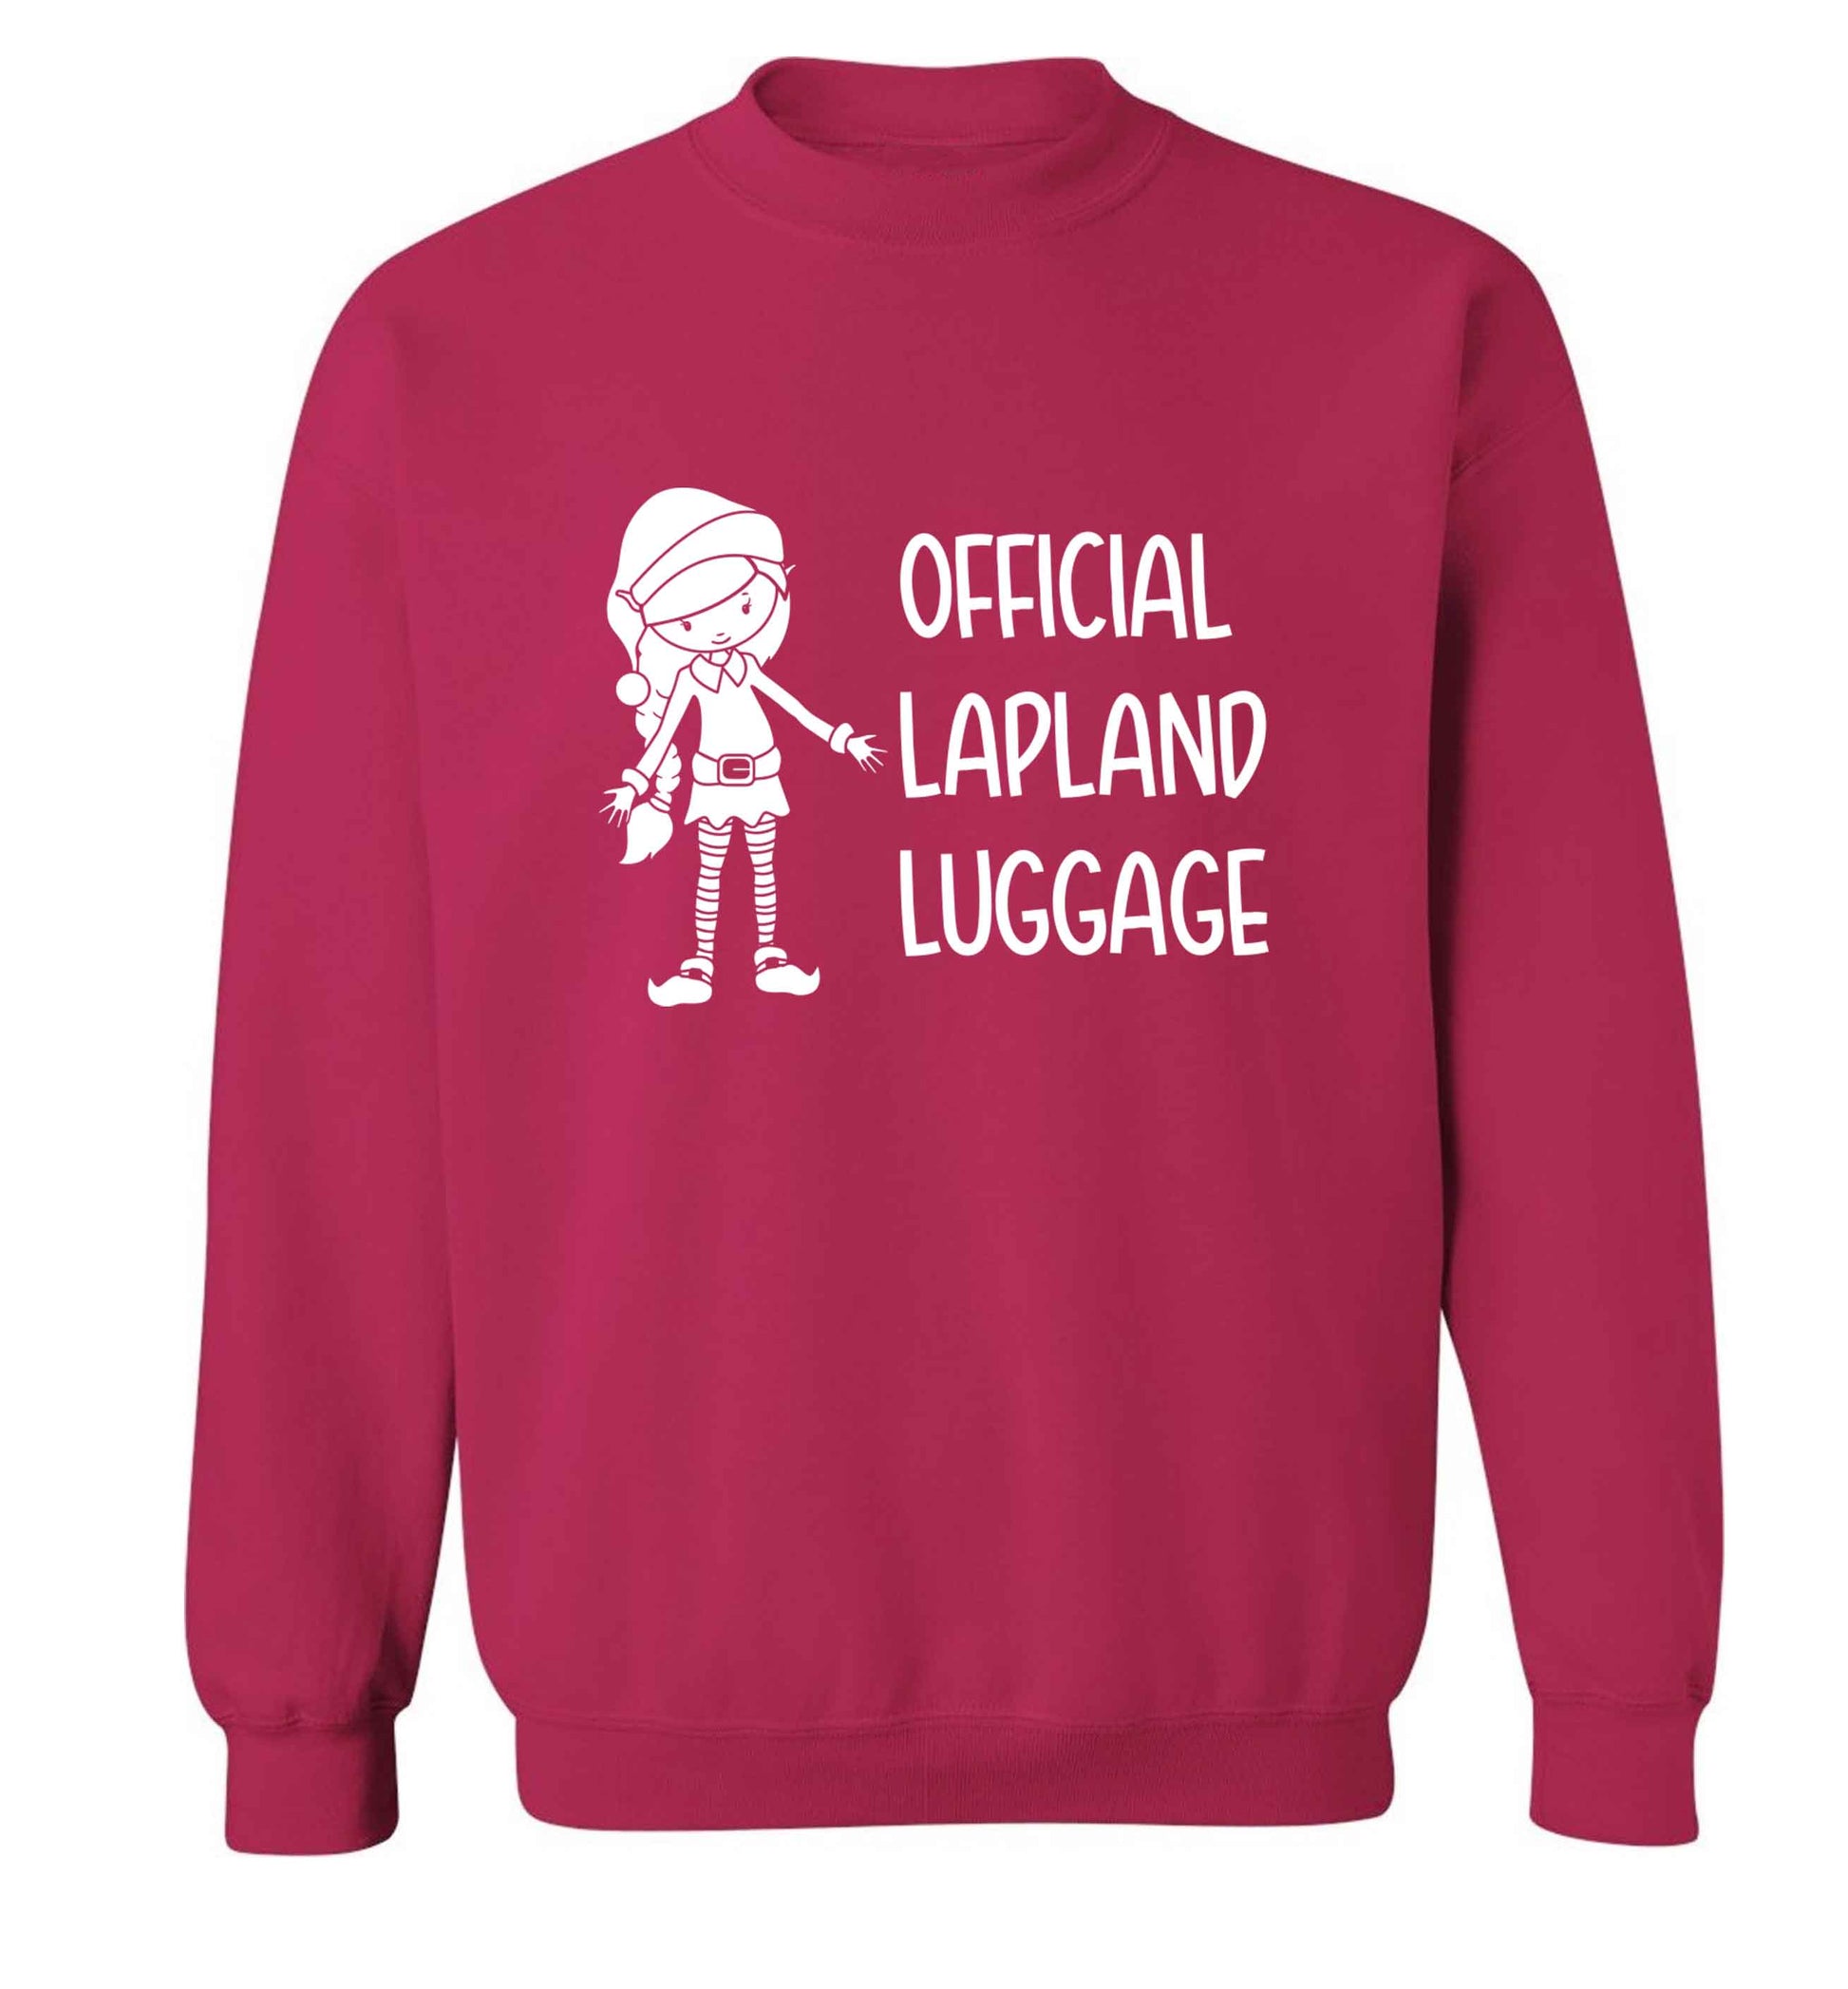 Official lapland luggage - Elf snowflake adult's unisex pink sweater 2XL